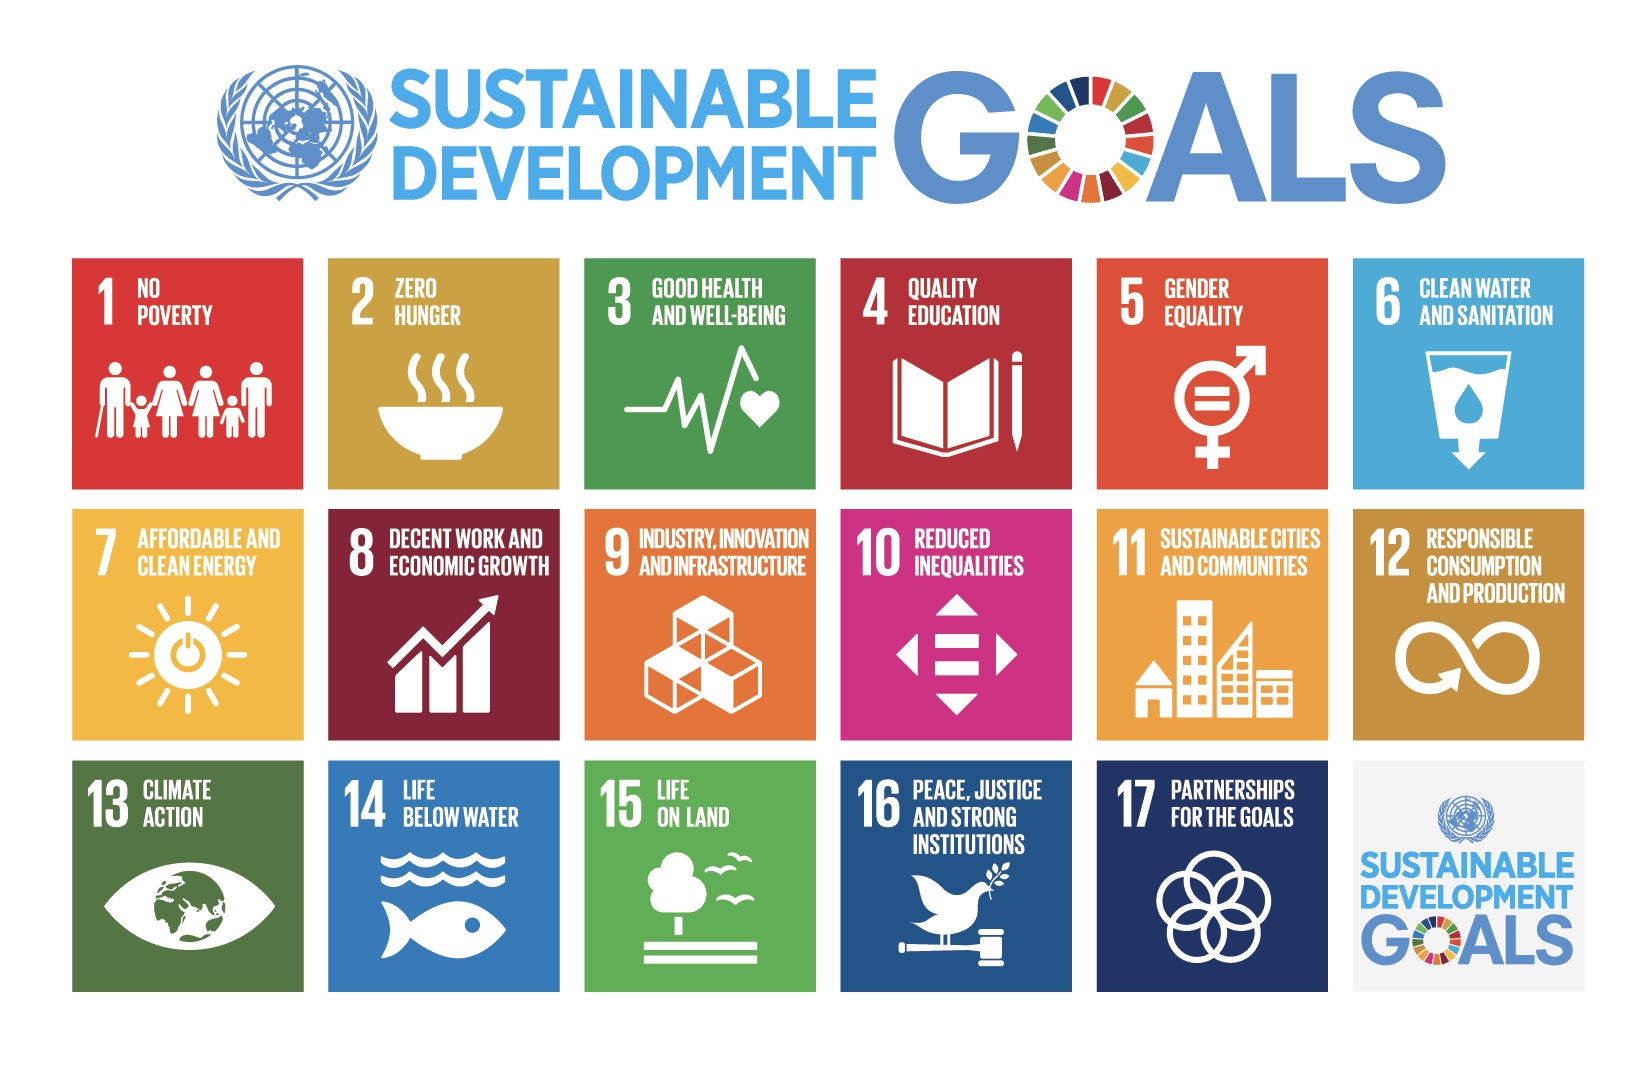 Text: UN Sustainability Goals with a list of 17 goals and icons for each